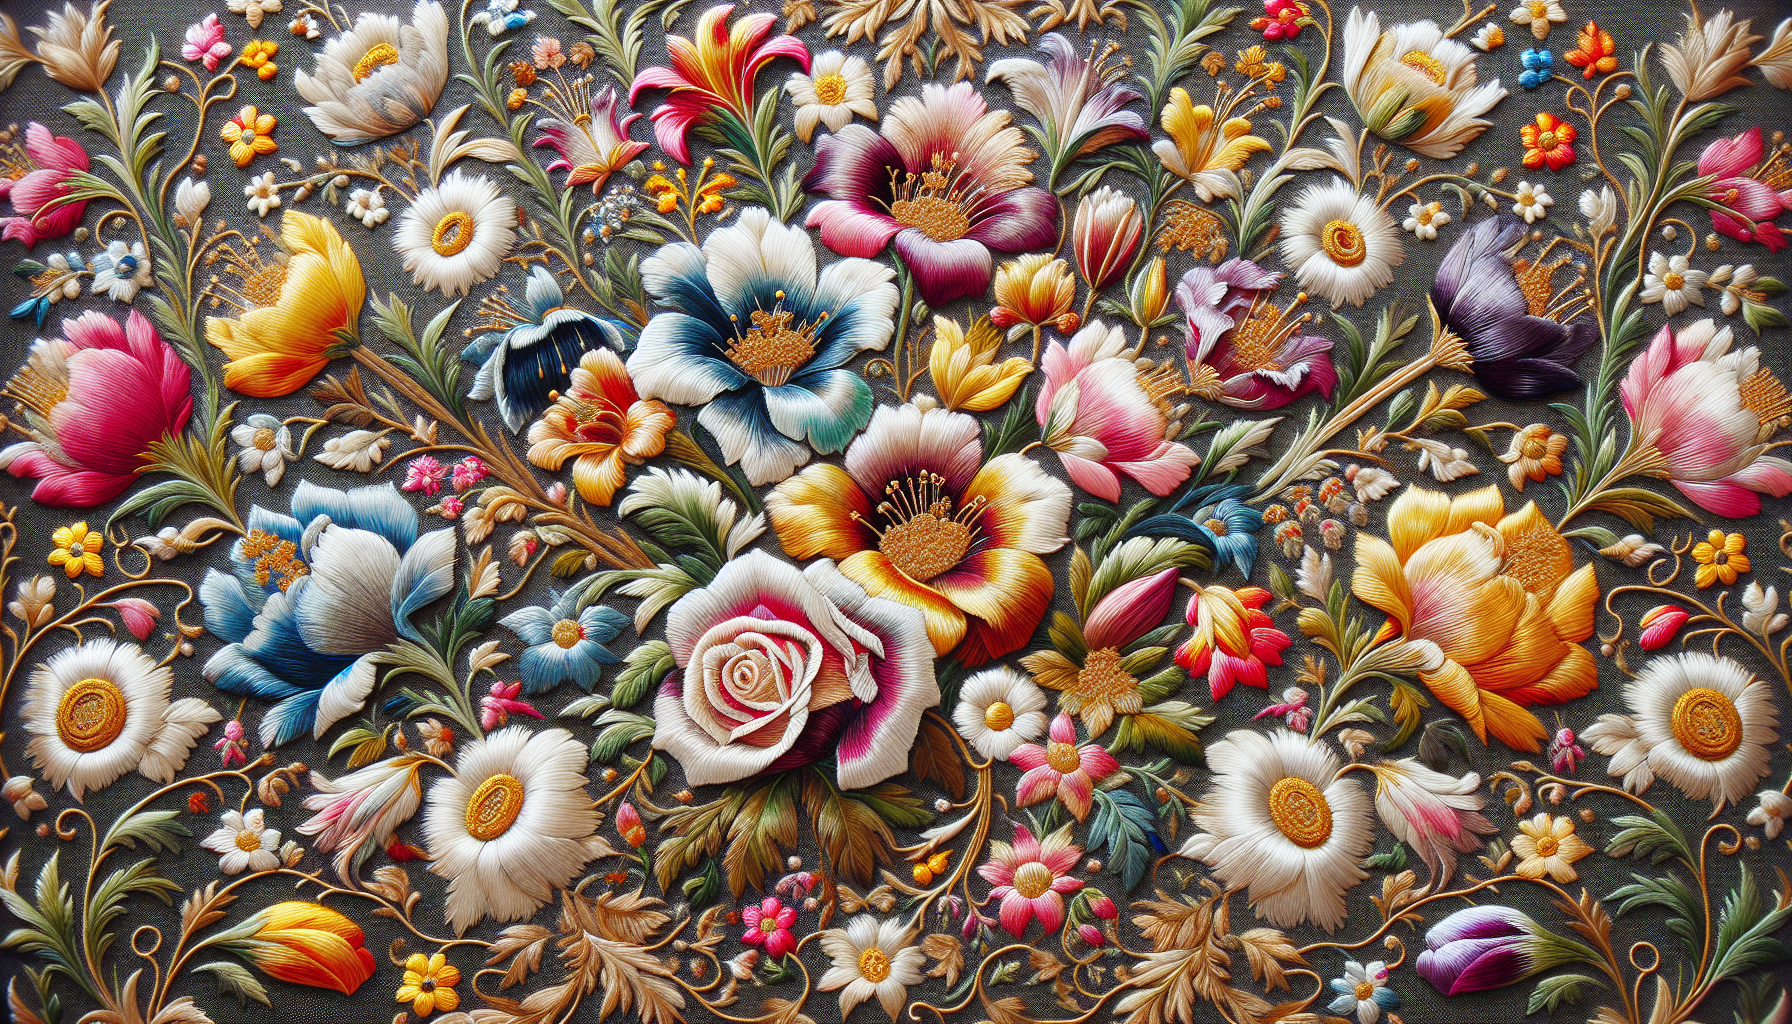 A collection of colourful embroidered flowers on a fabric